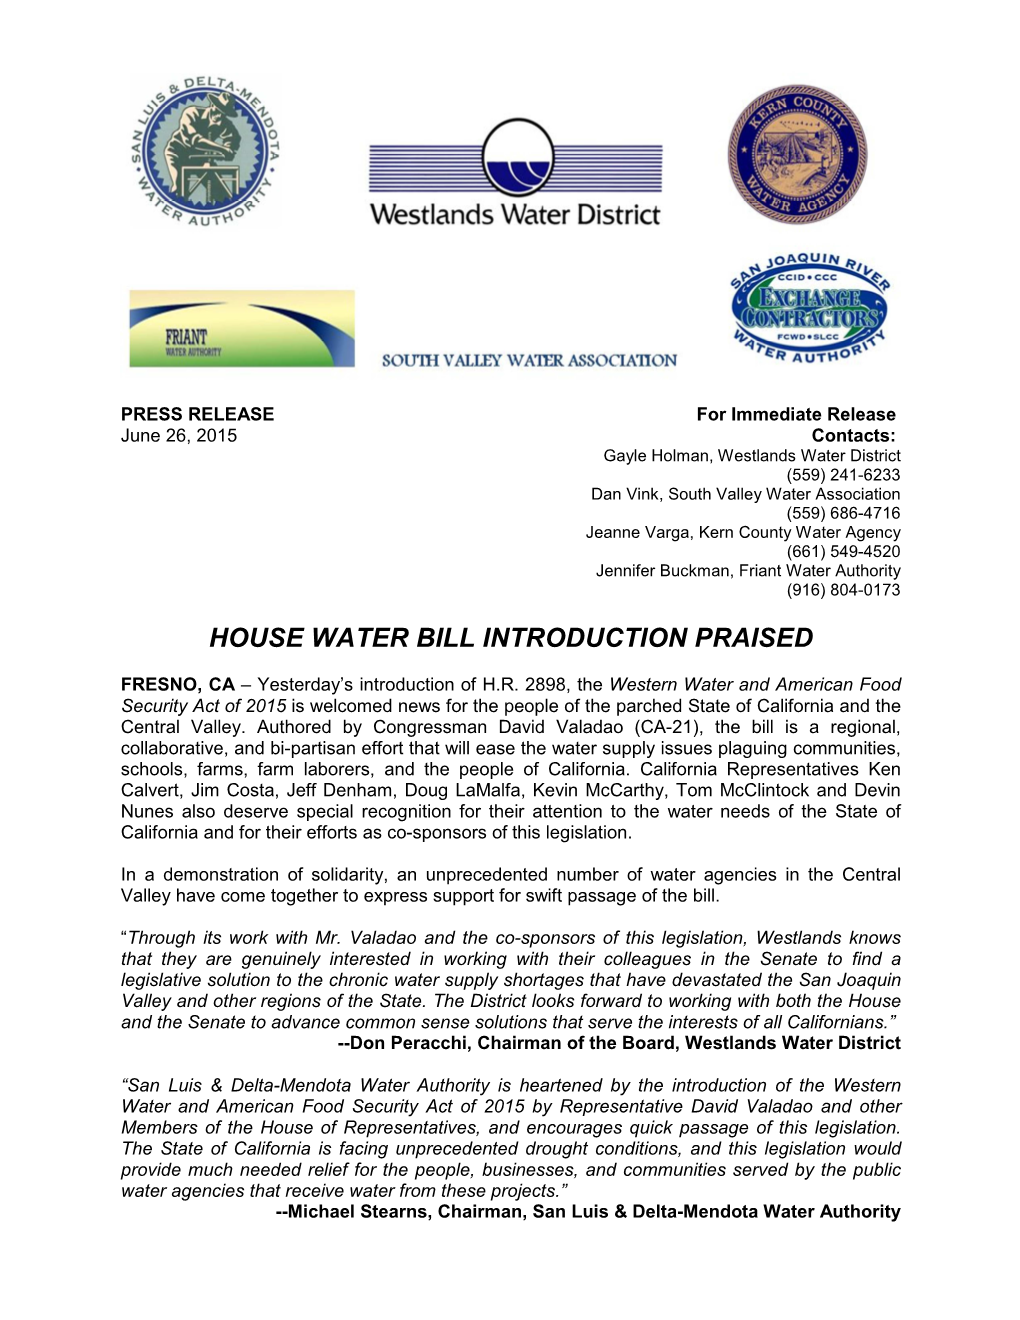 House Water Bill Introduction Praised